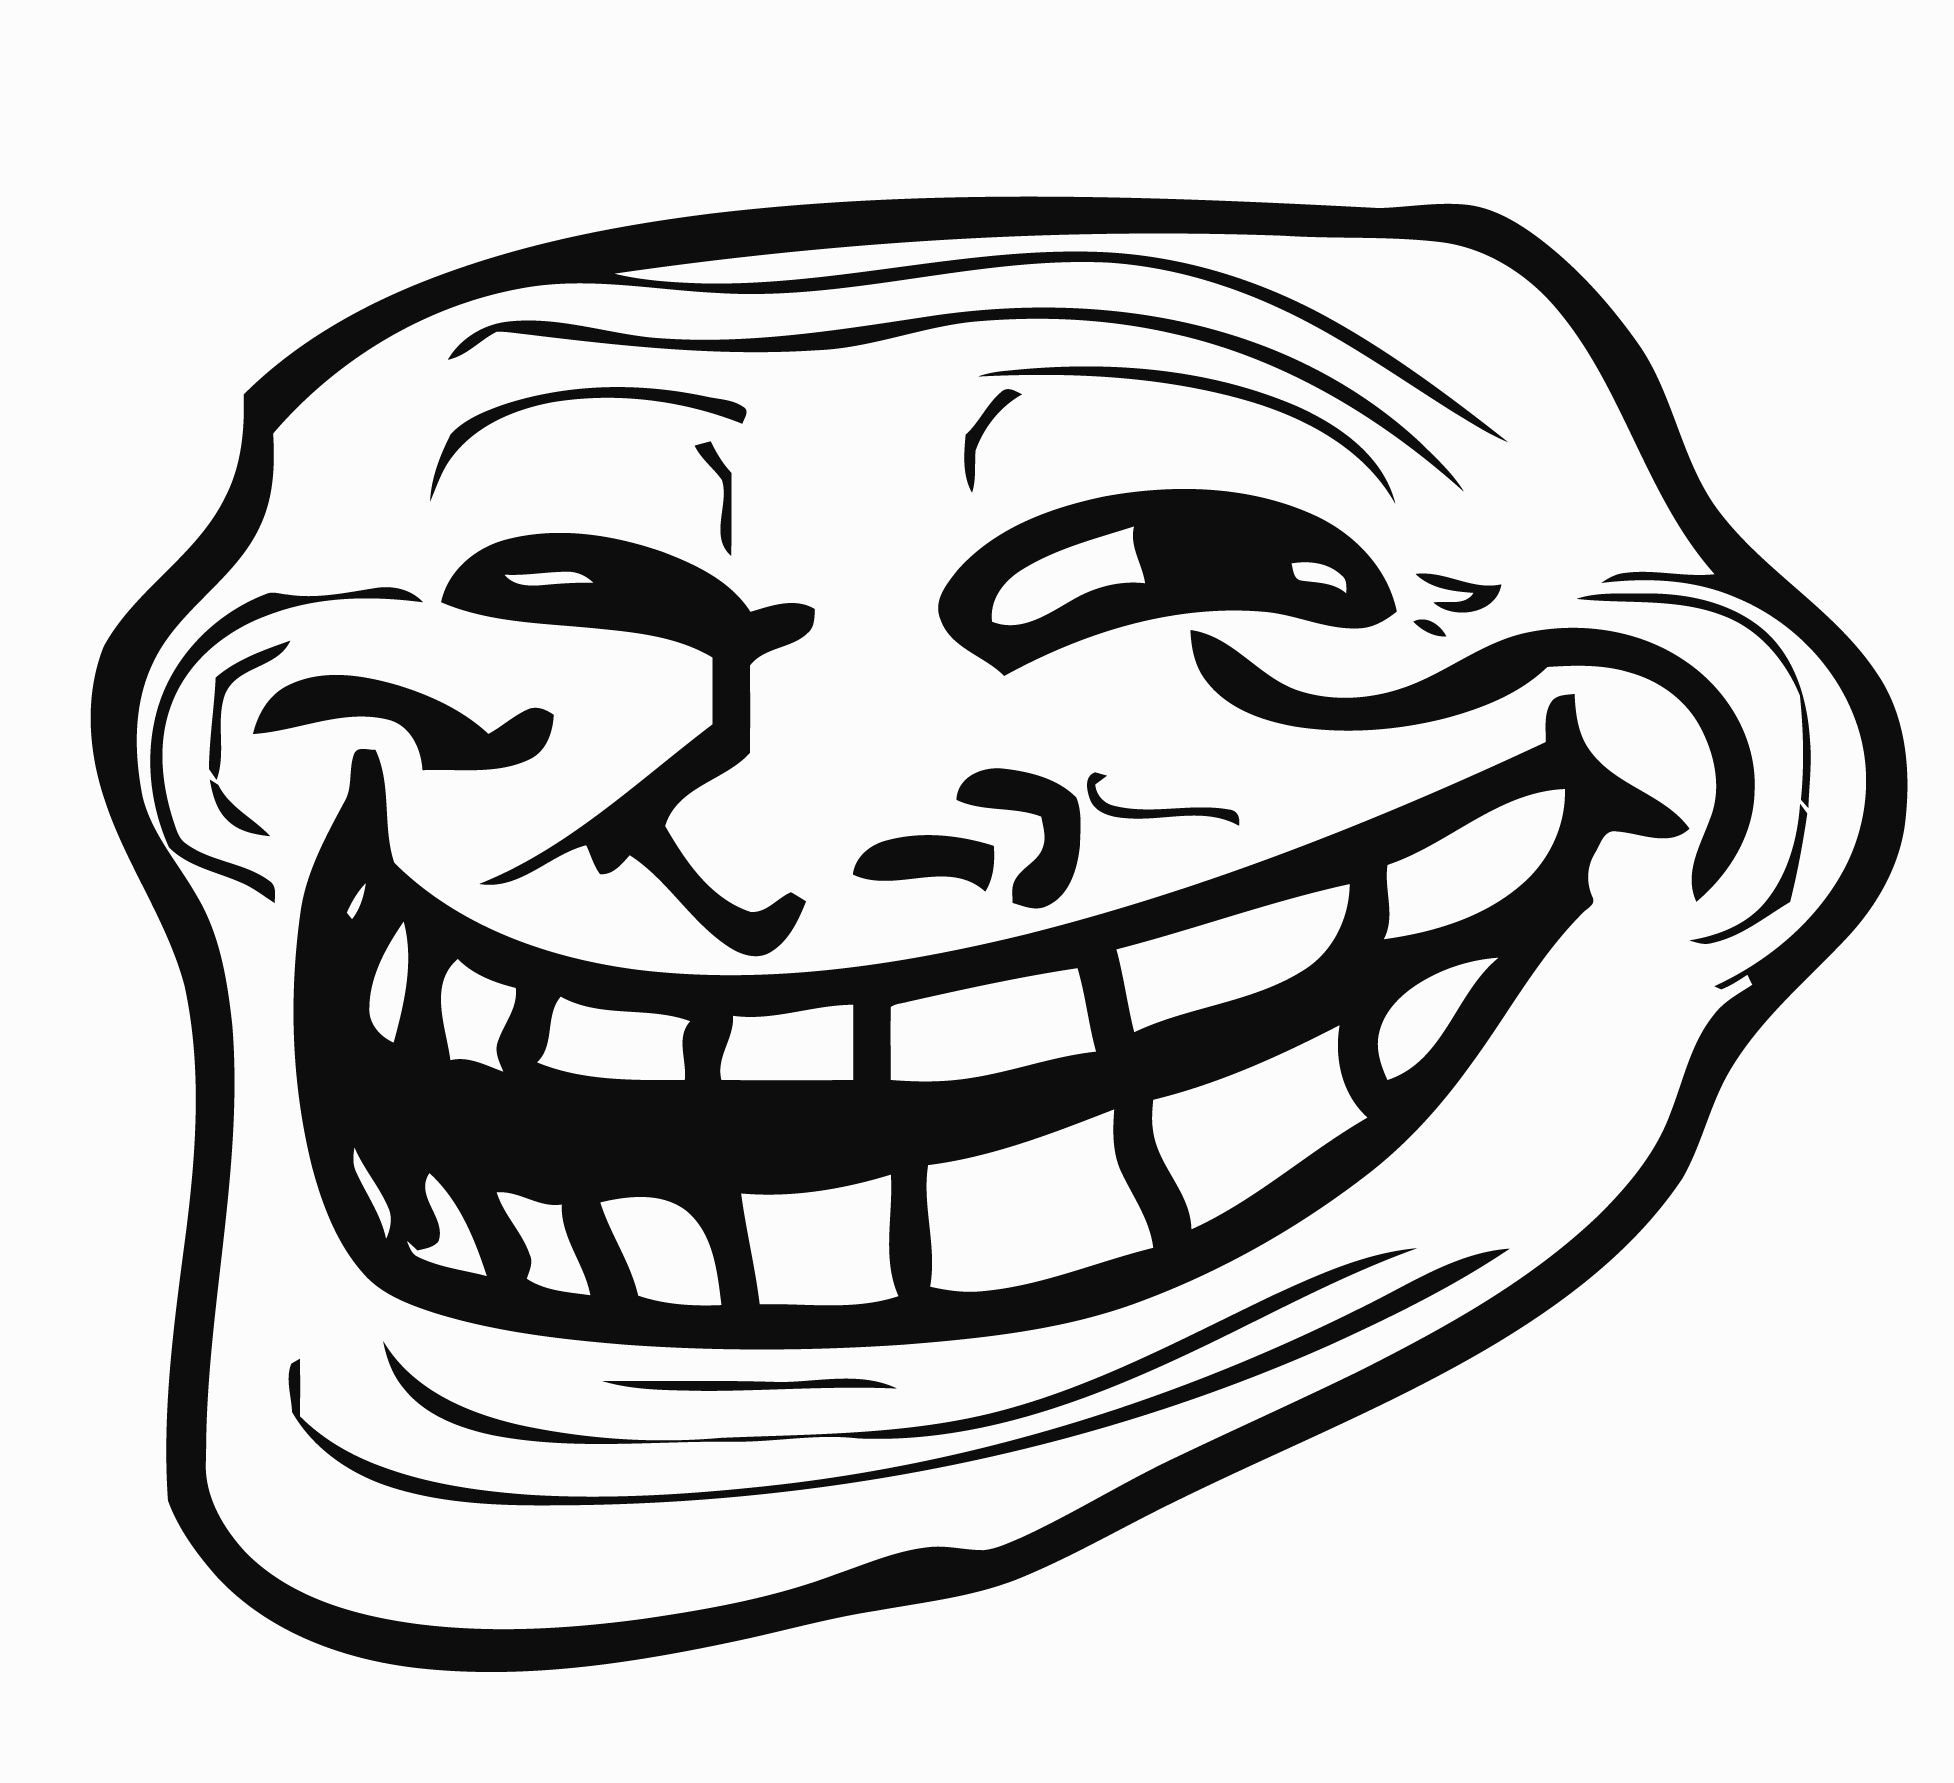 PRINTABLE troll face colouring page! - Imgur